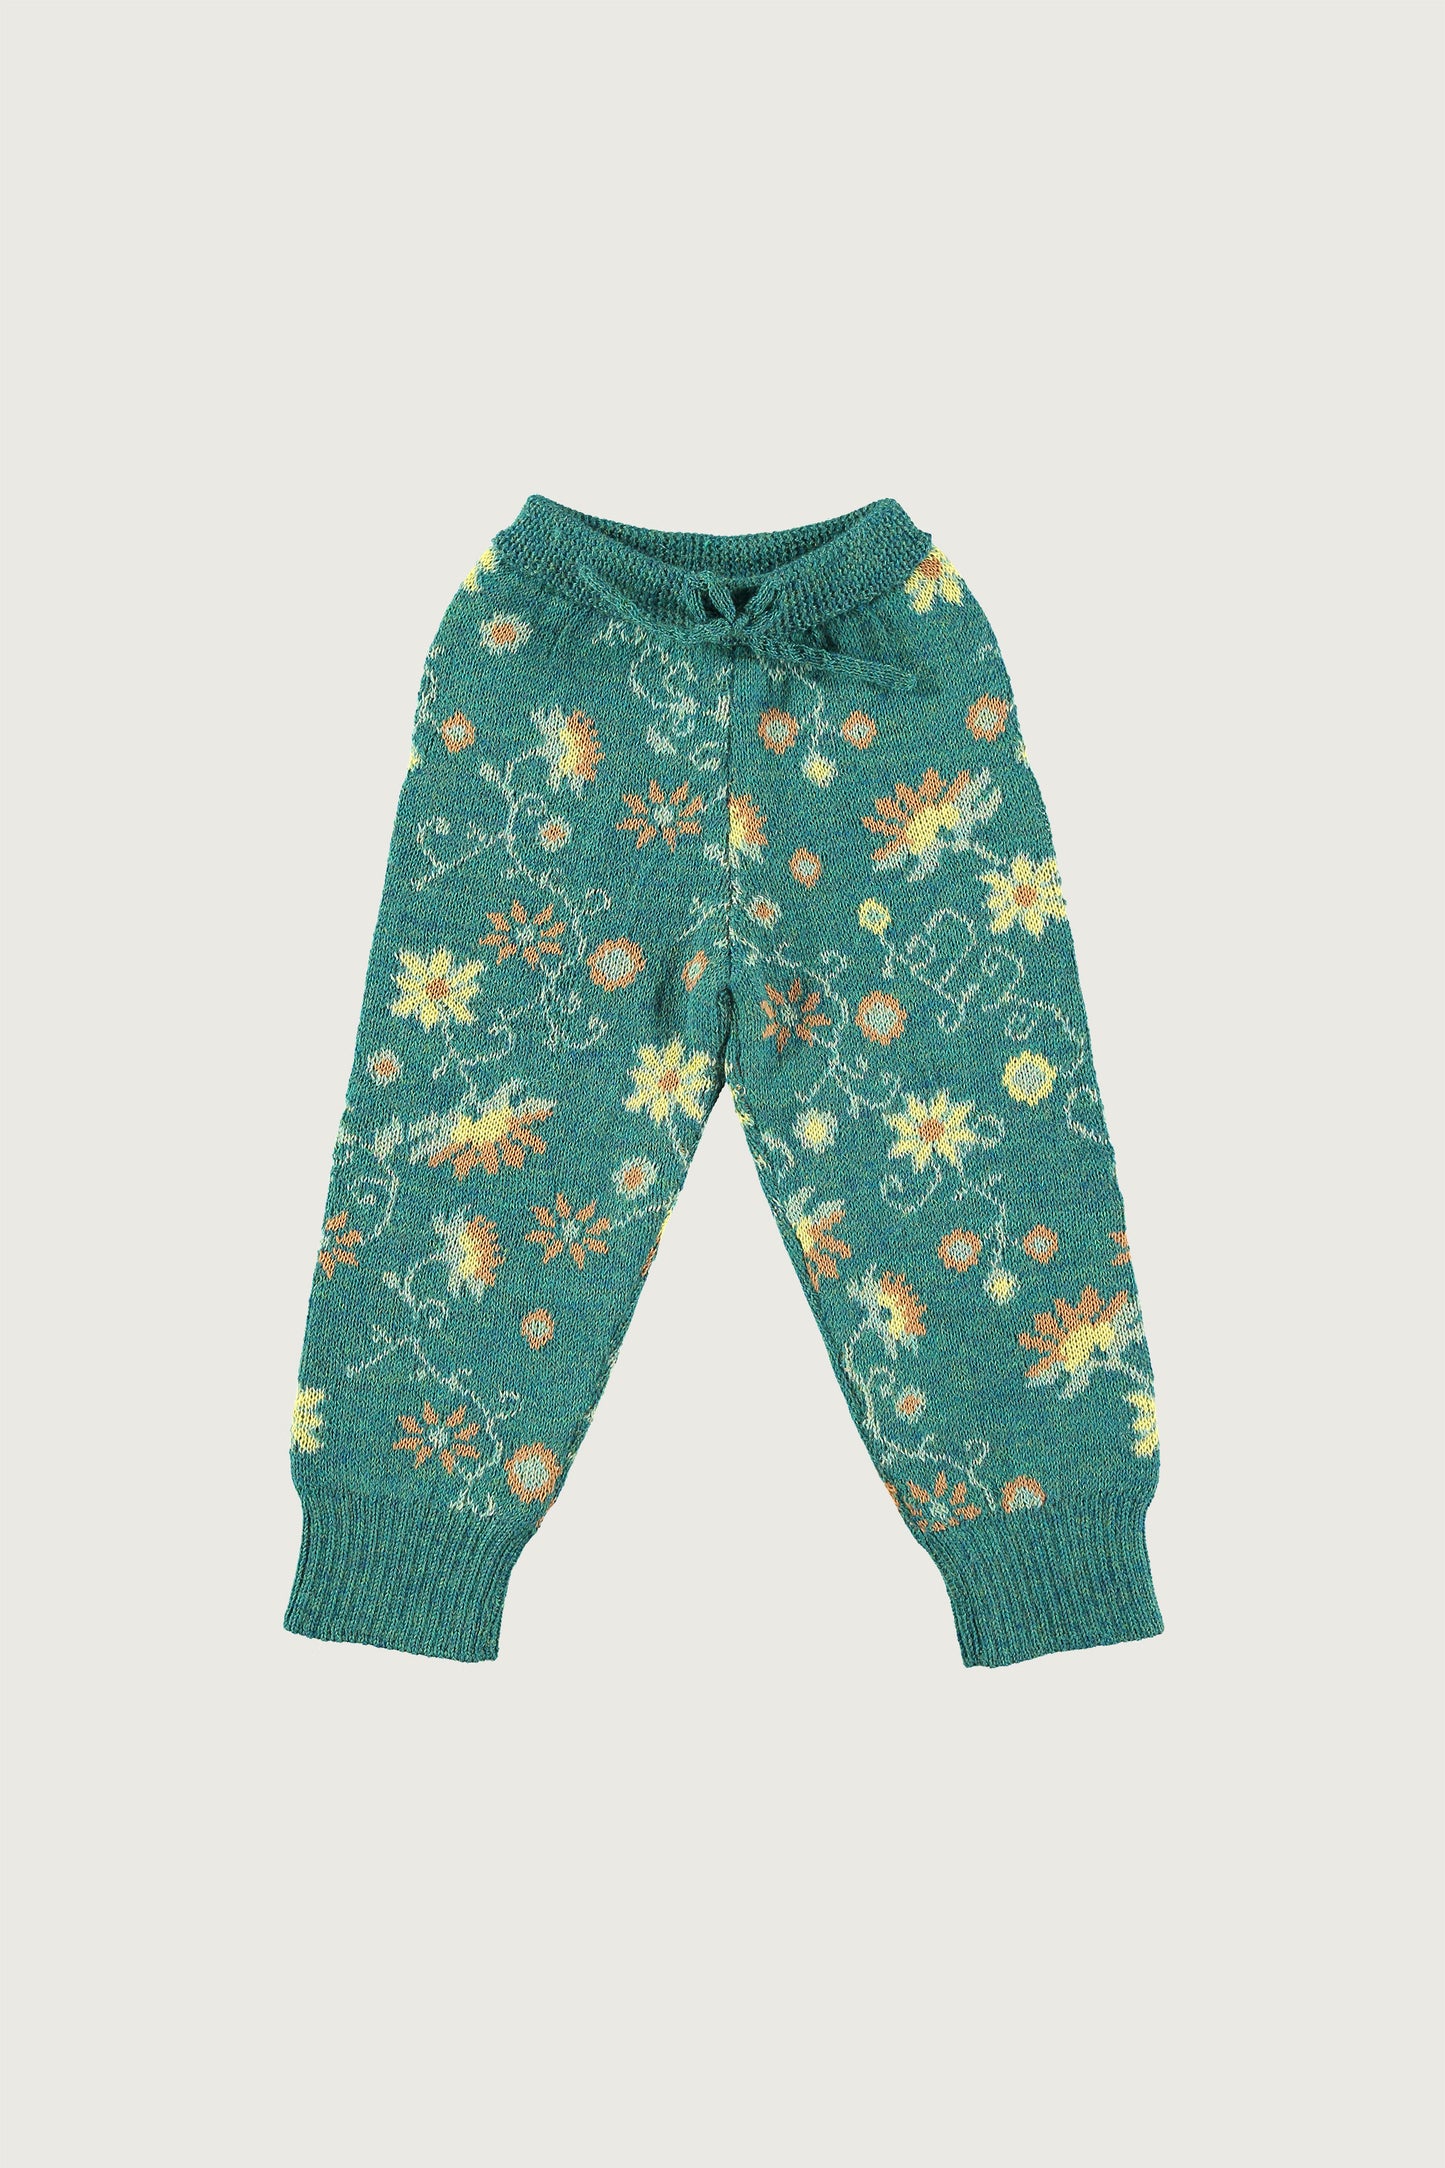 Coco Au Lait MEXICAN FLOWERS KNITTED BABY TROUSERS  North Sea